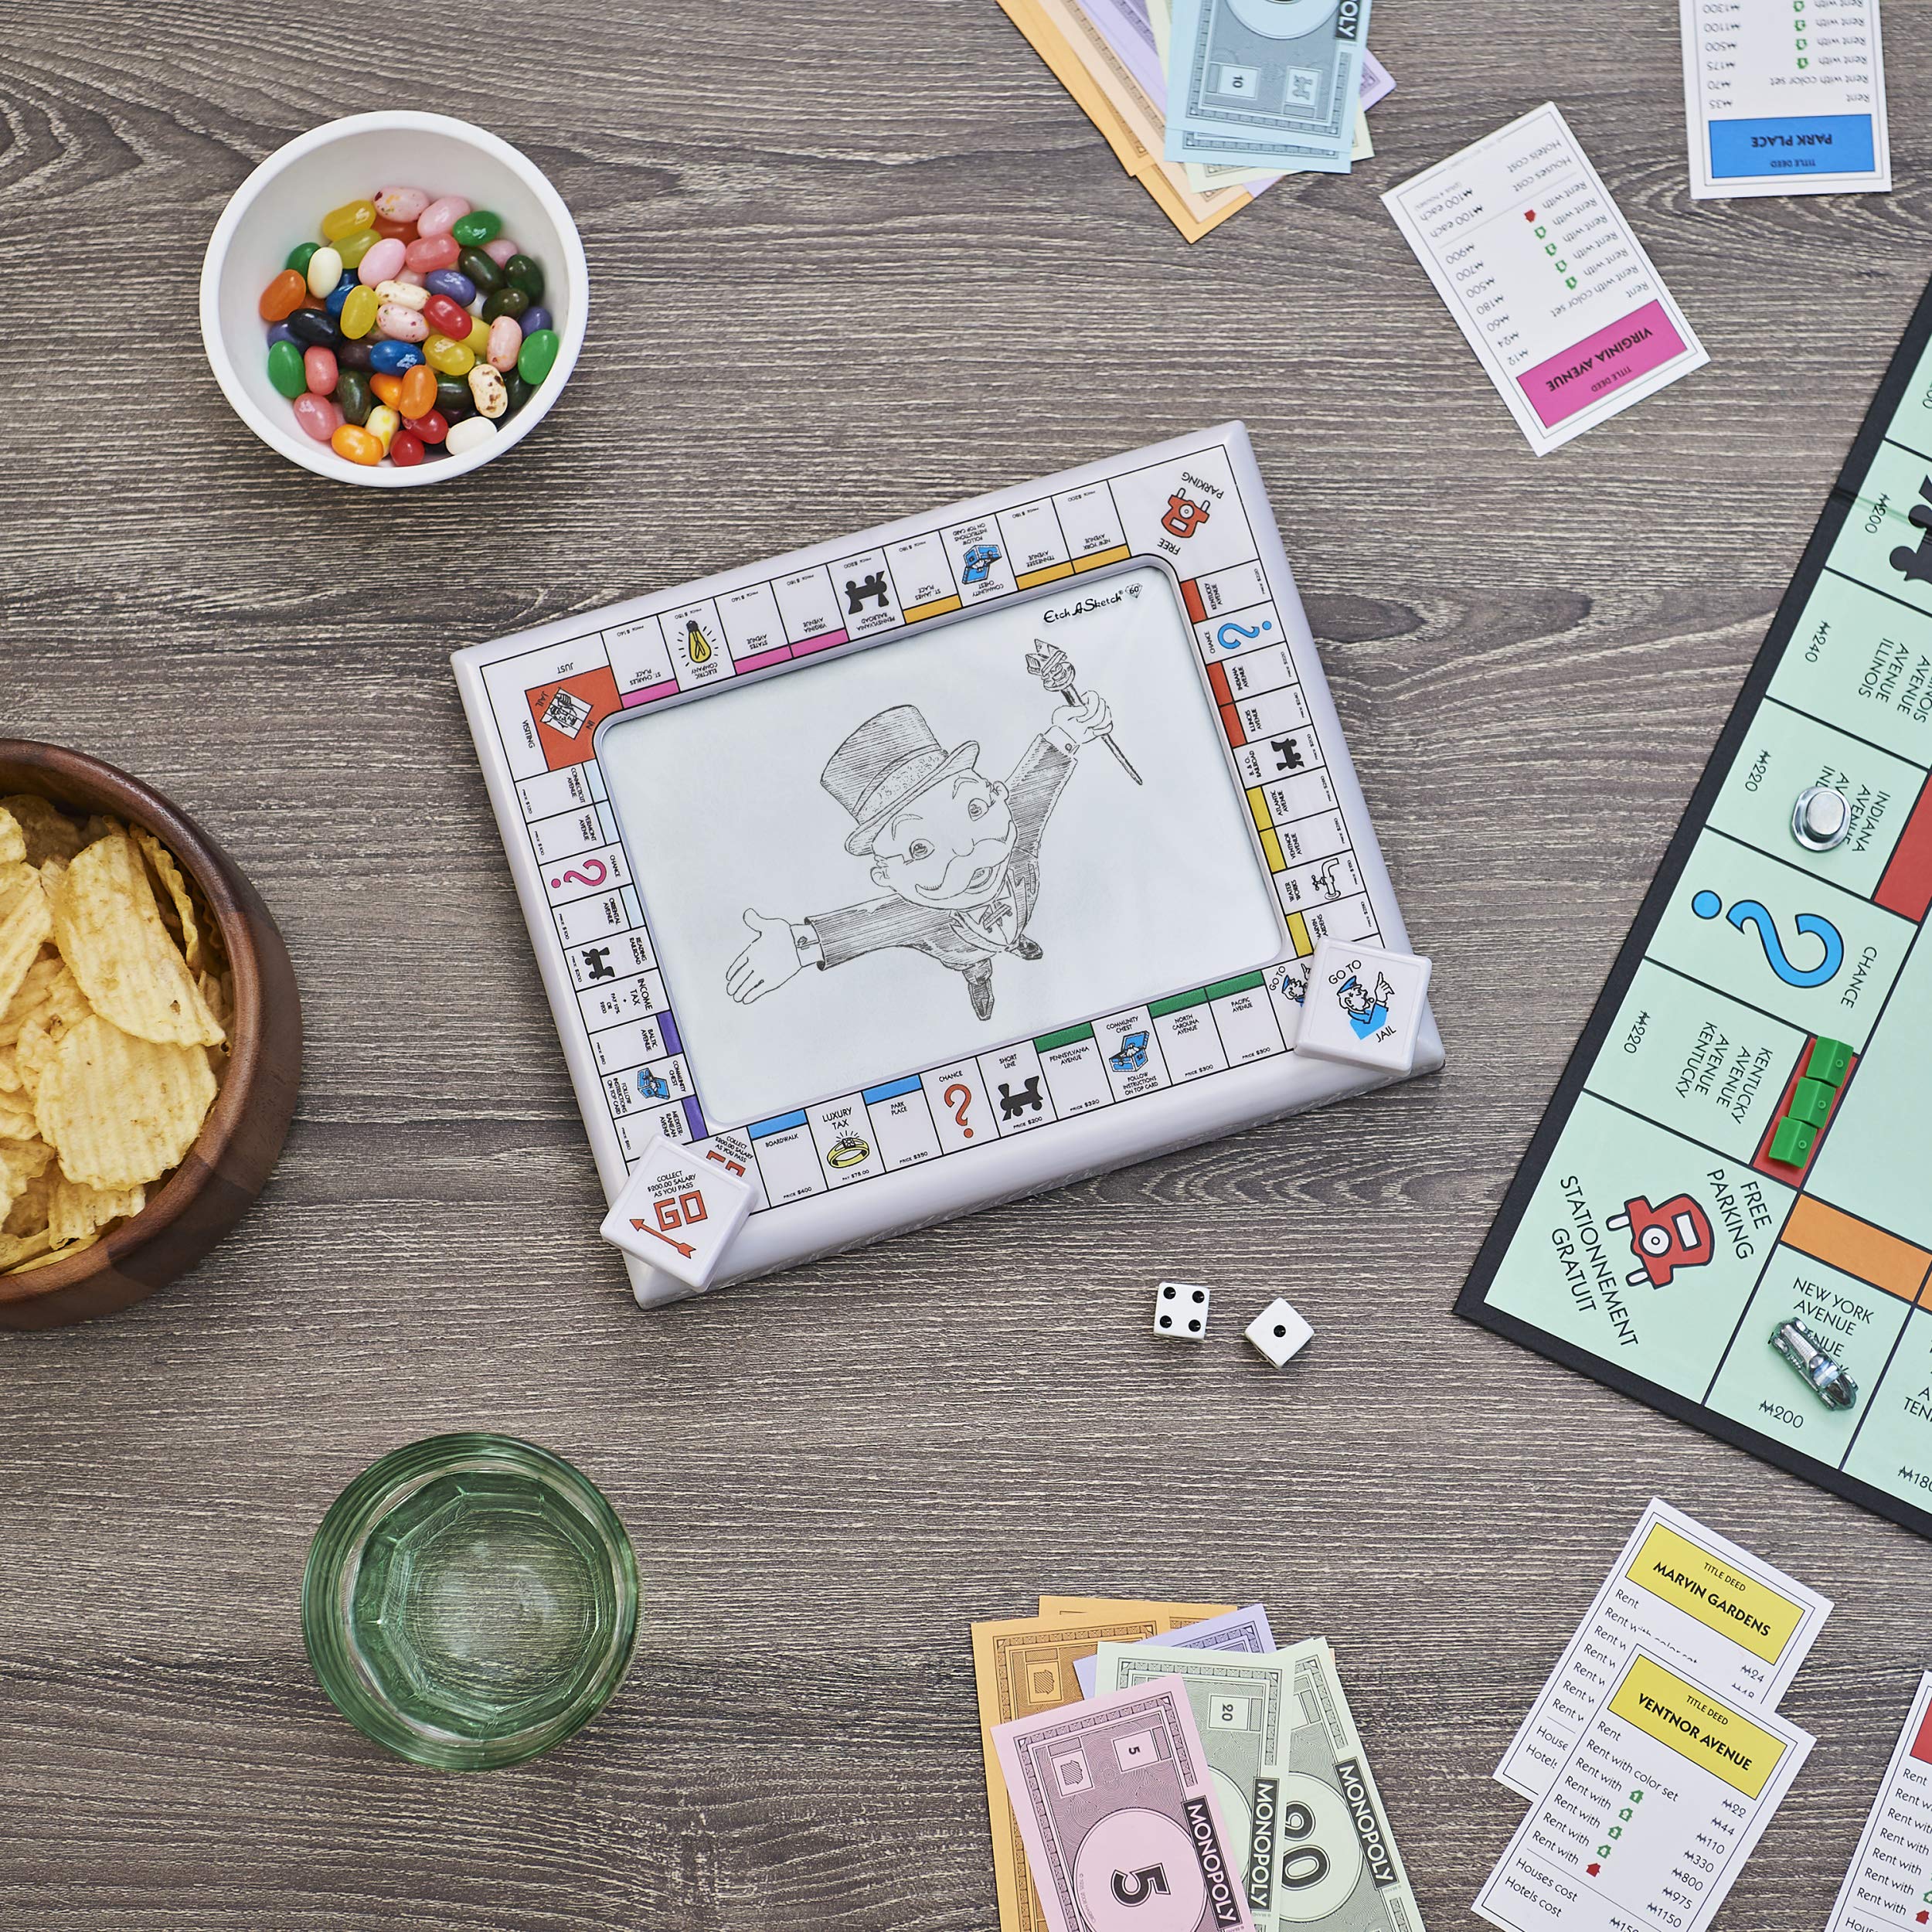 Etch A Sketch Classic, Monopoly Limited-Edition Drawing Toy with Magic Screen, for Ages 3 and Up